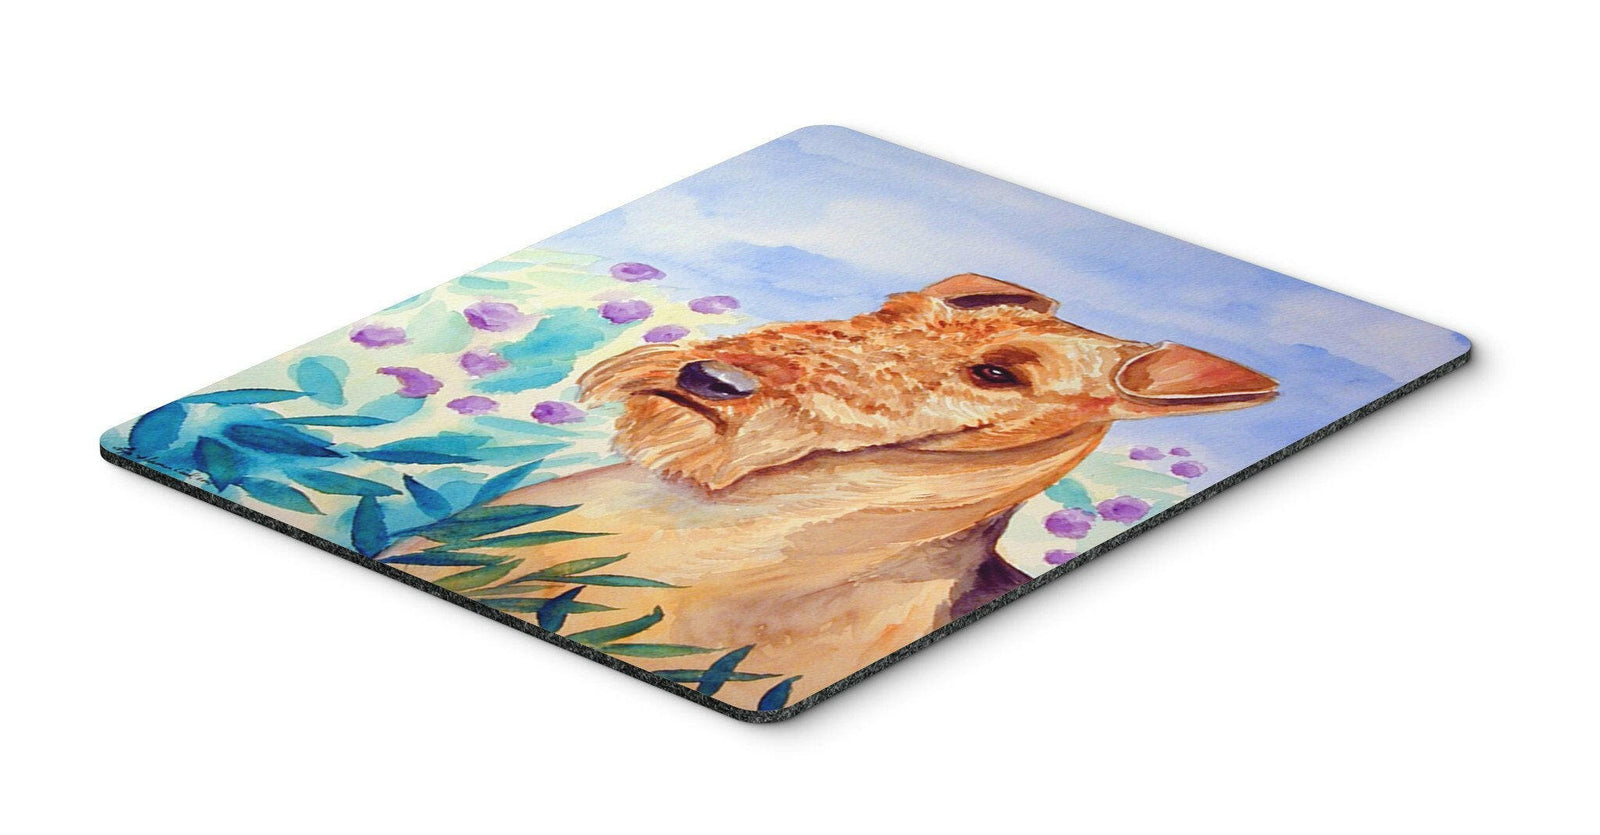 Airedale Terrier in Flowers Mouse Pad, Hot Pad or Trivet by Caroline's Treasures